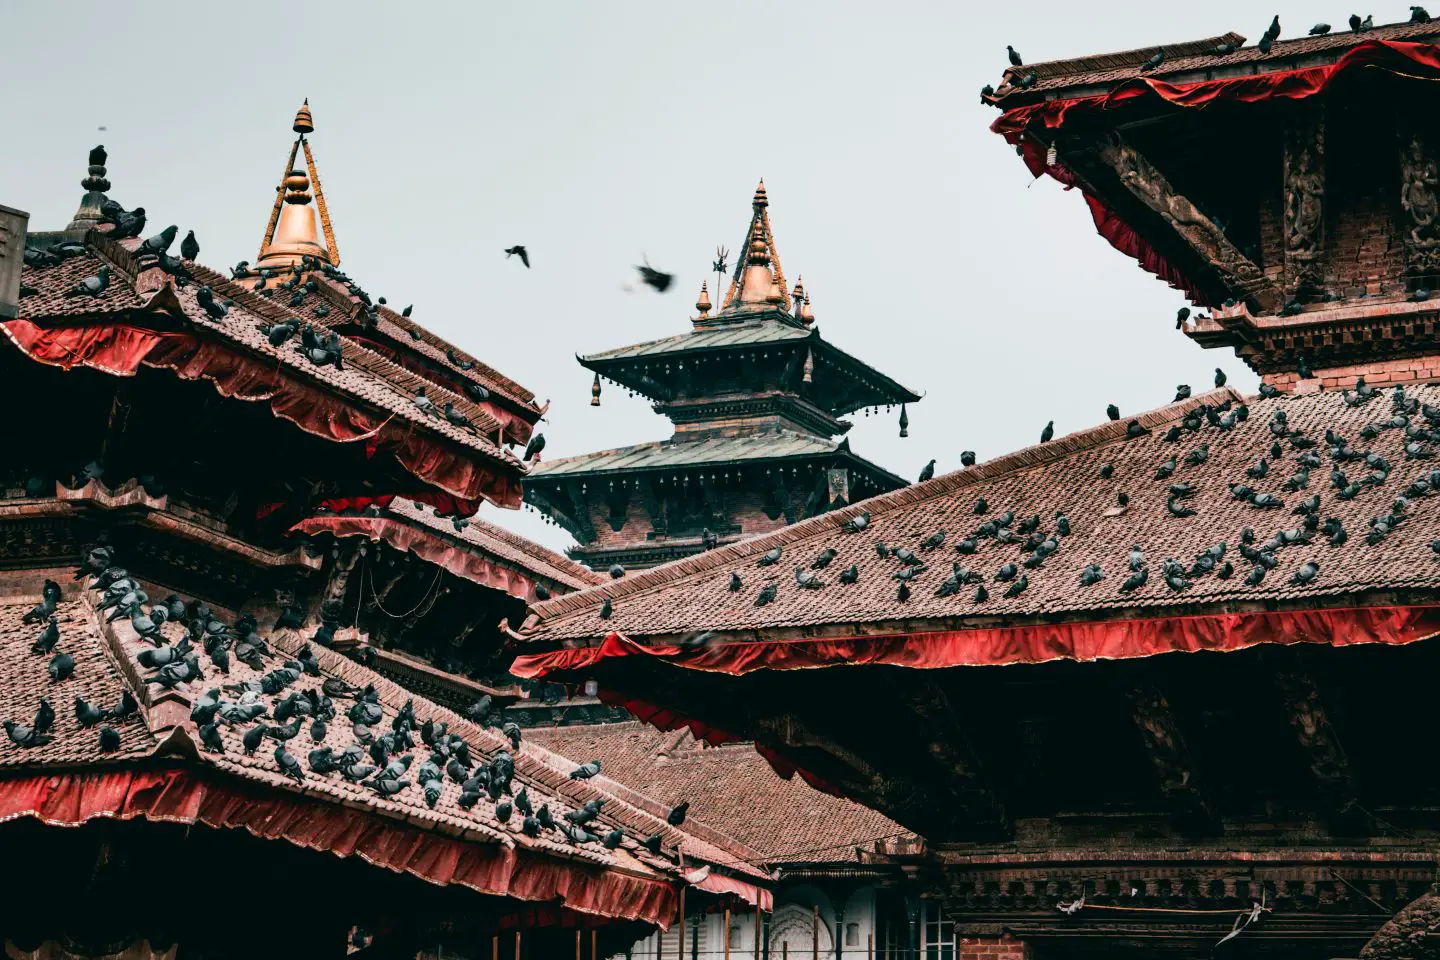 Red and brown roofs in Nepal covered in birds